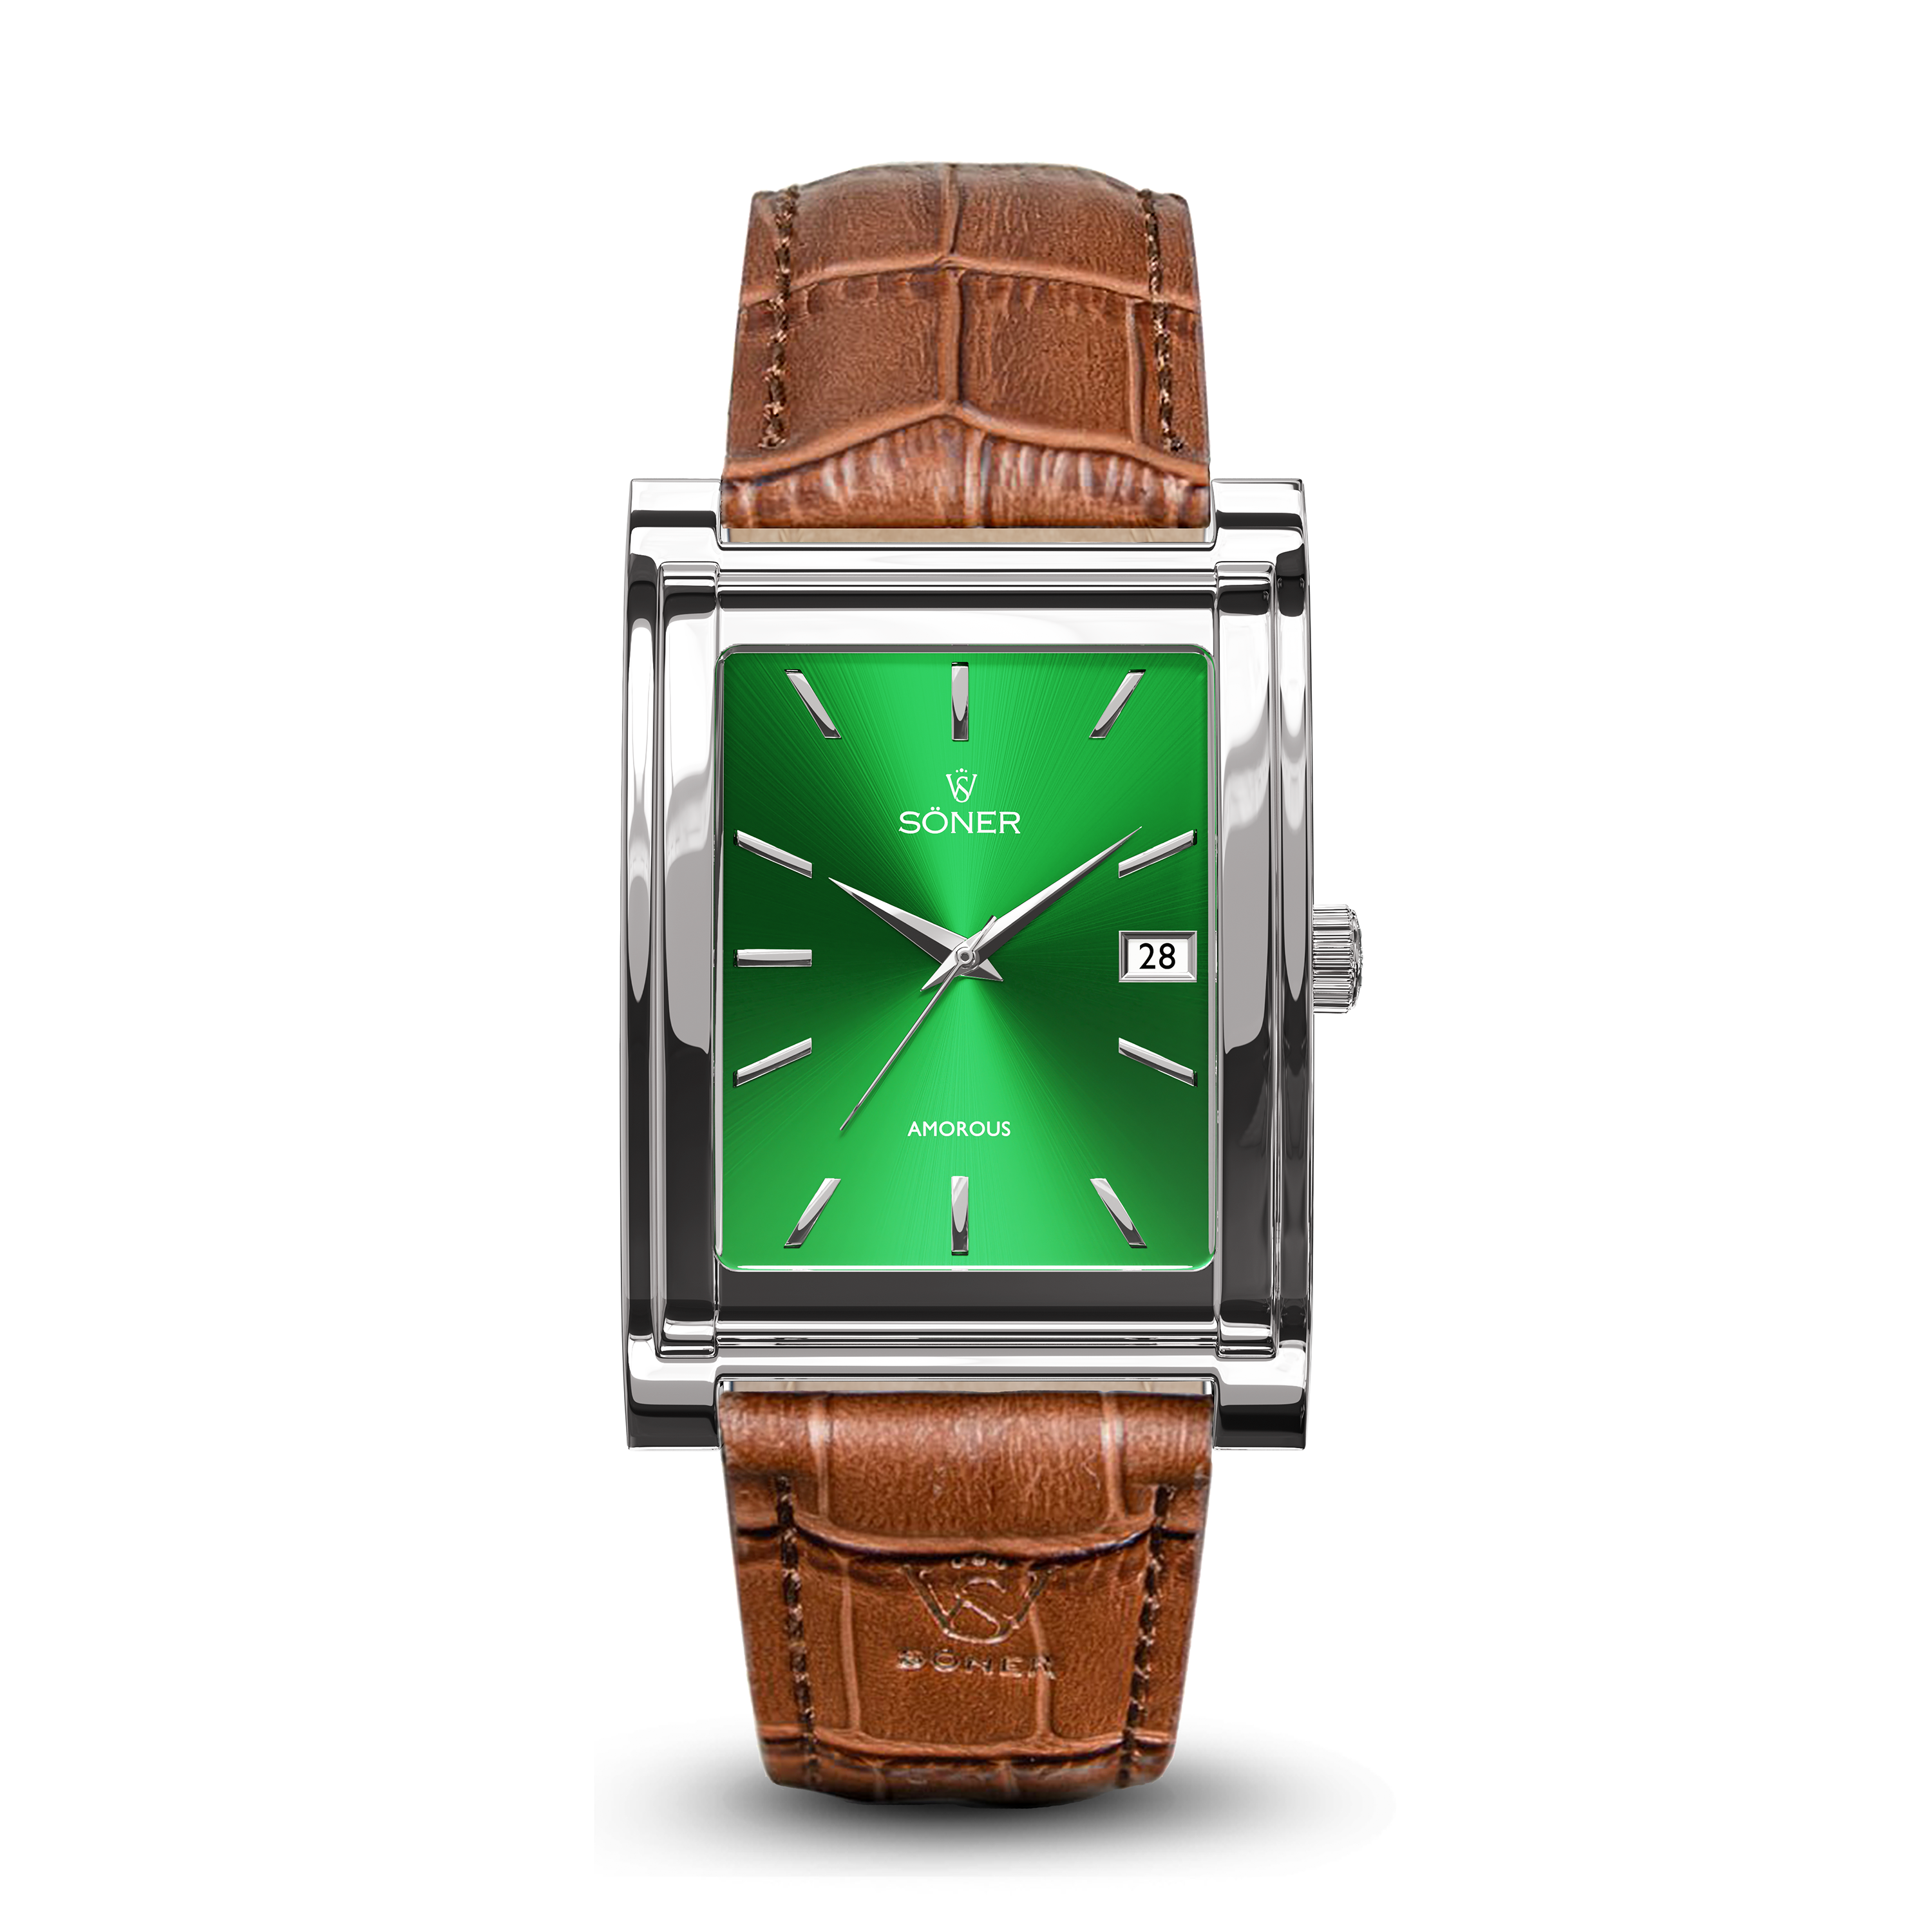 Square automatic watch, Amorous Tokyo with green dial - brown alligator pattern leather strap front view